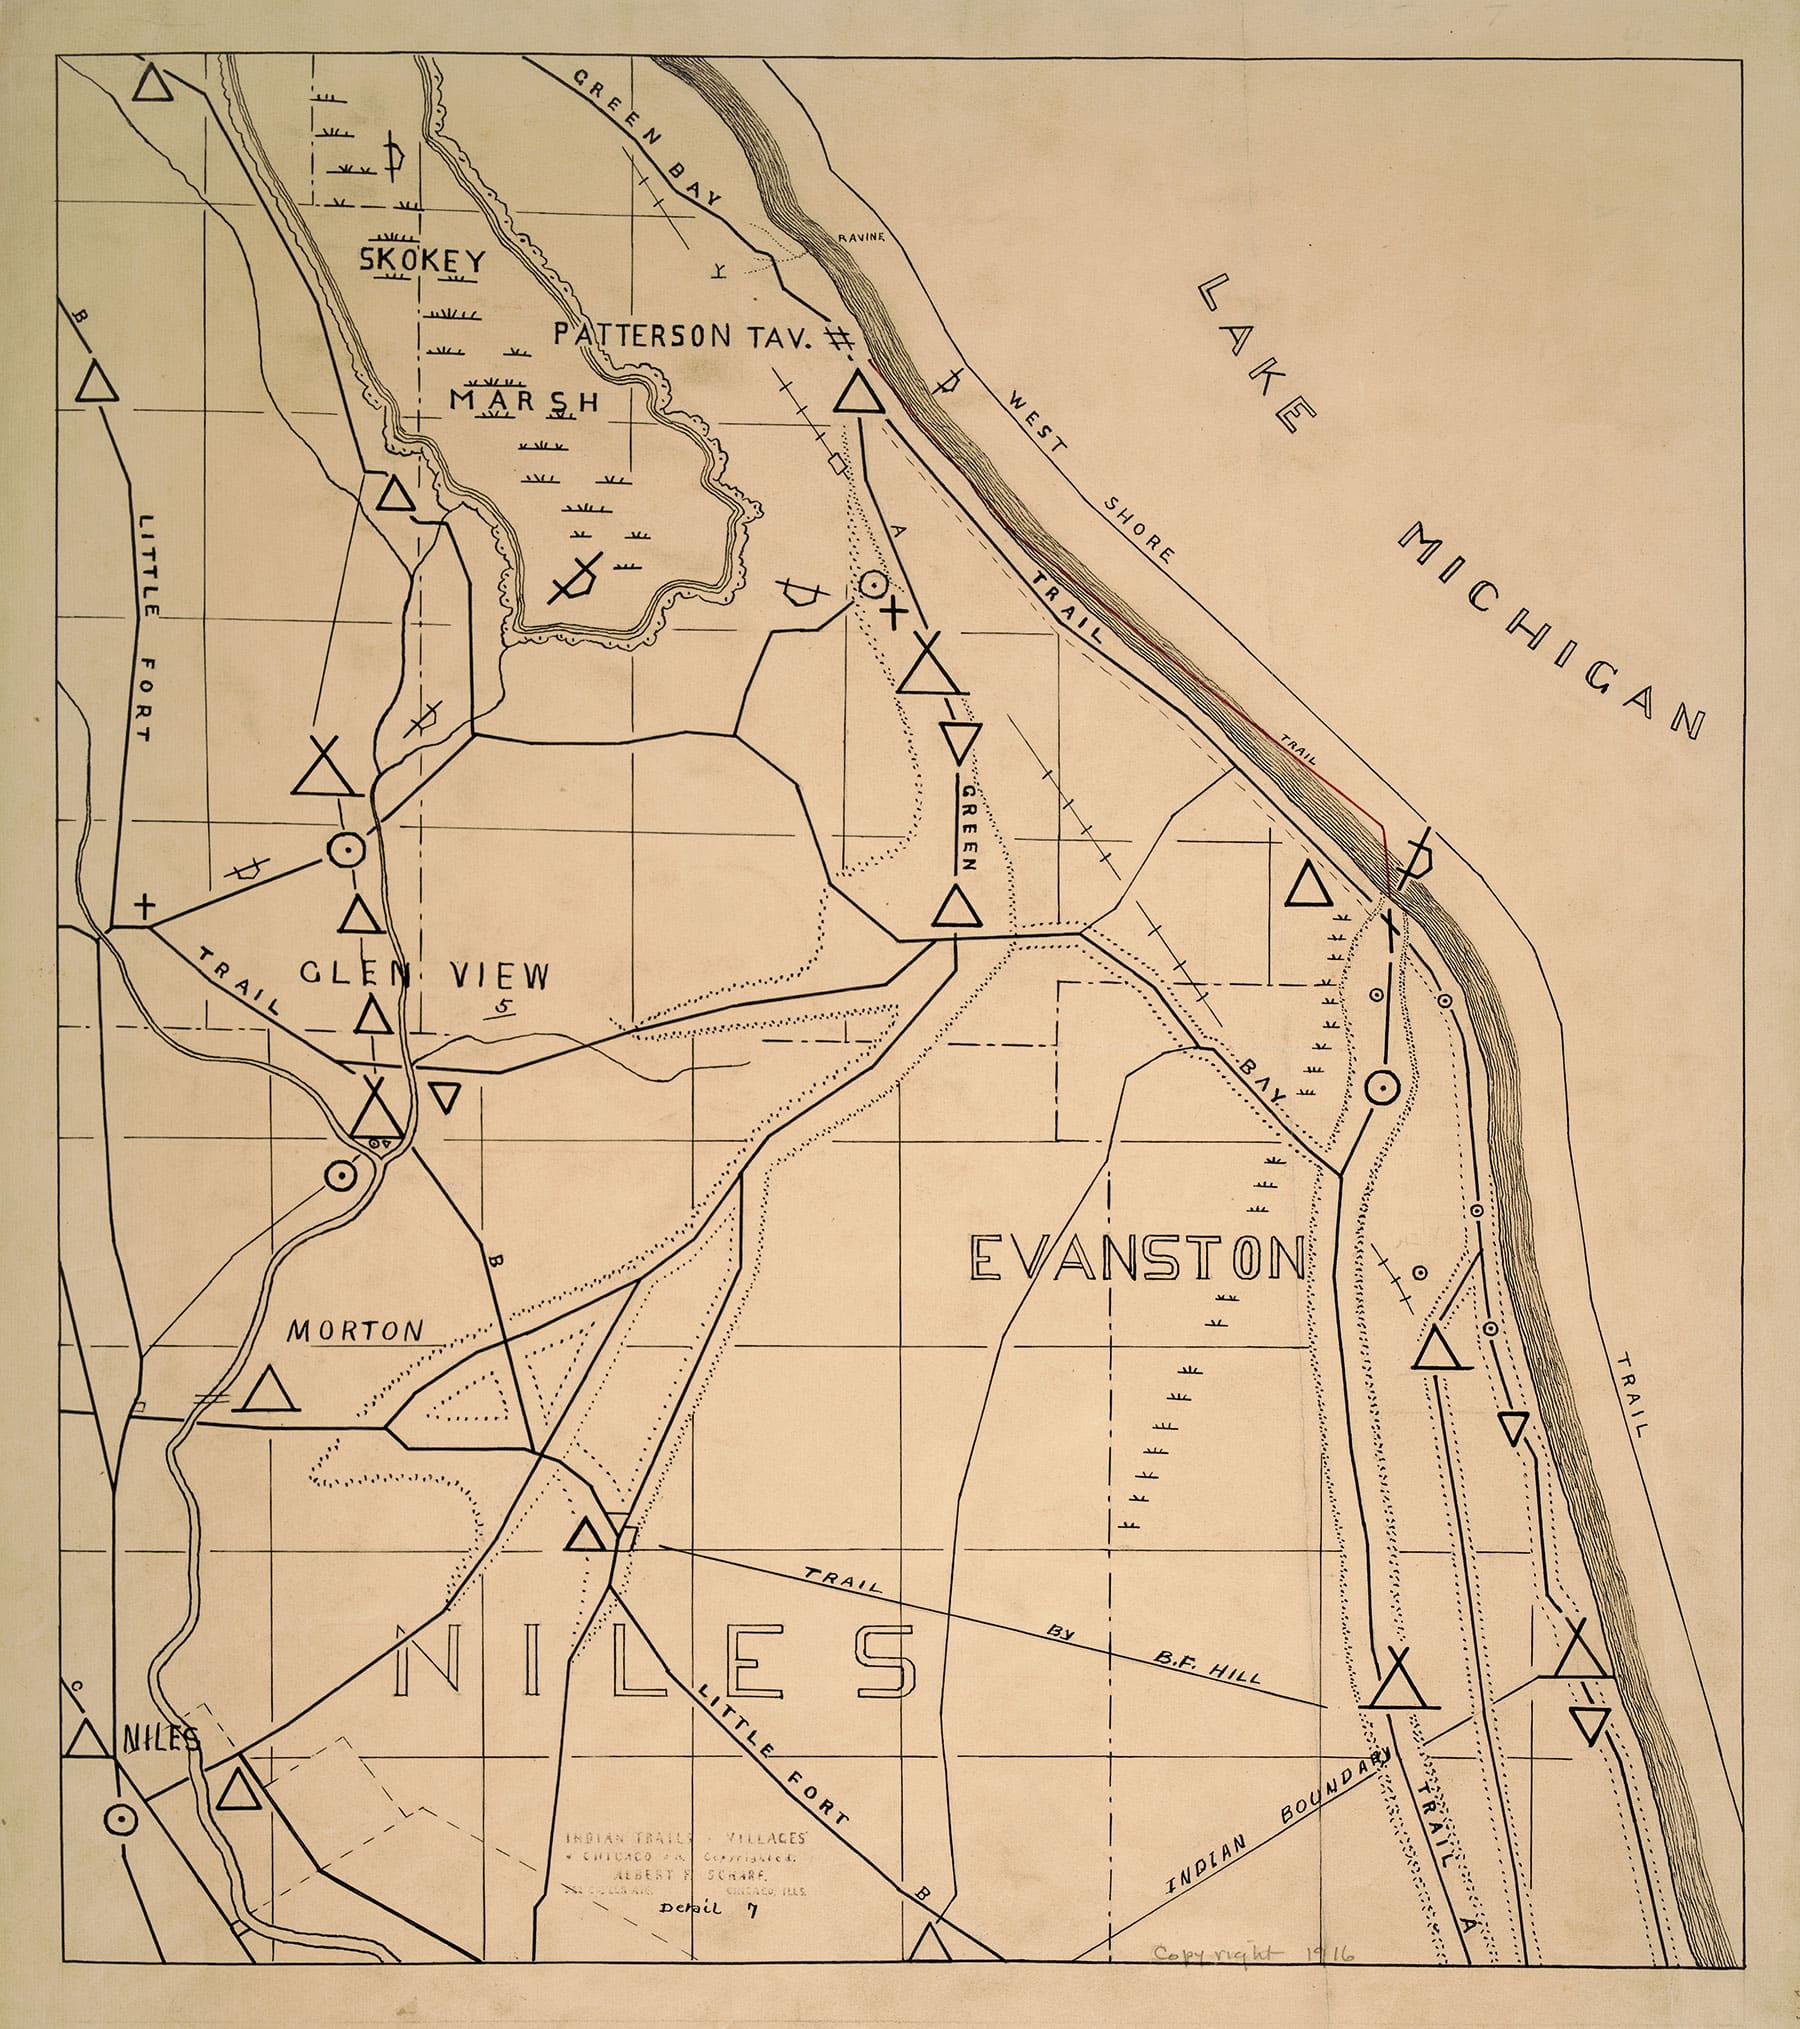 Map of Indigenous trails and villages near Niles and Evanston